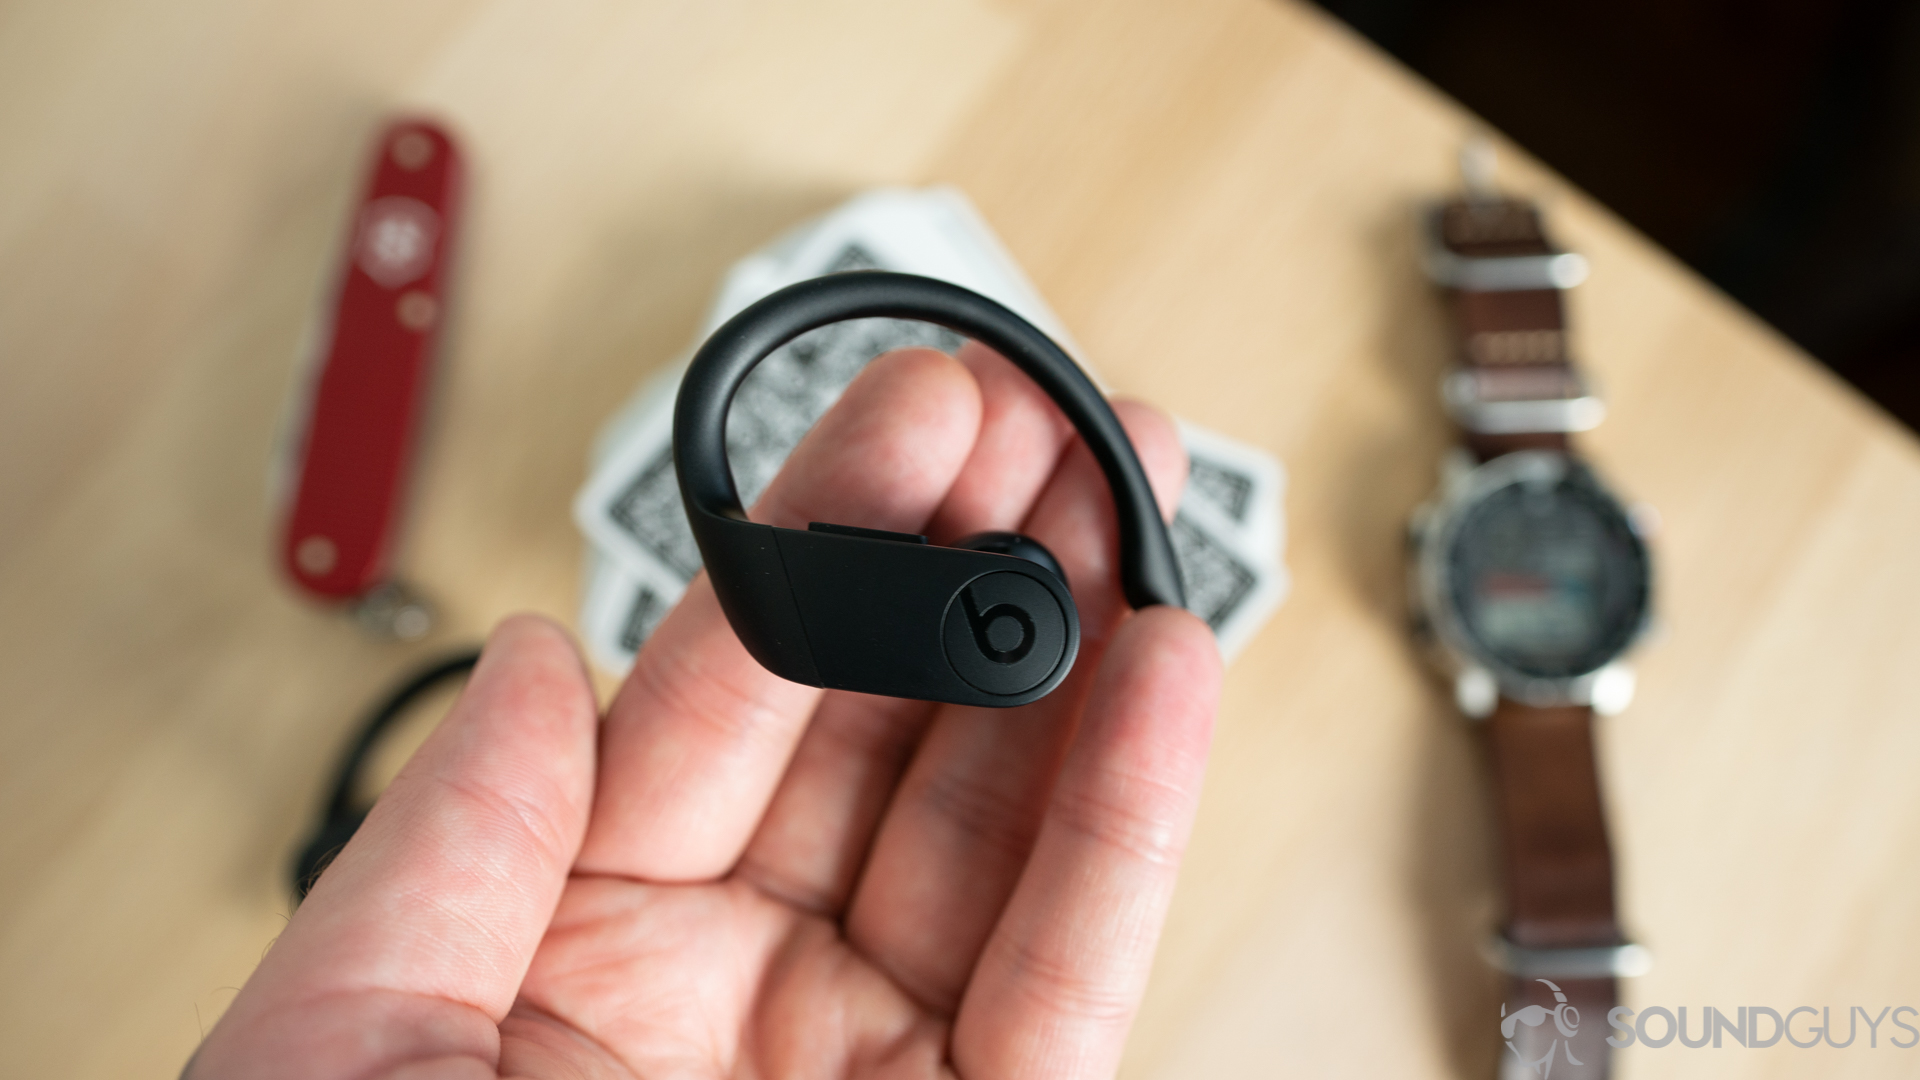 A photo of the Beats Powerbeats Pro in hand.